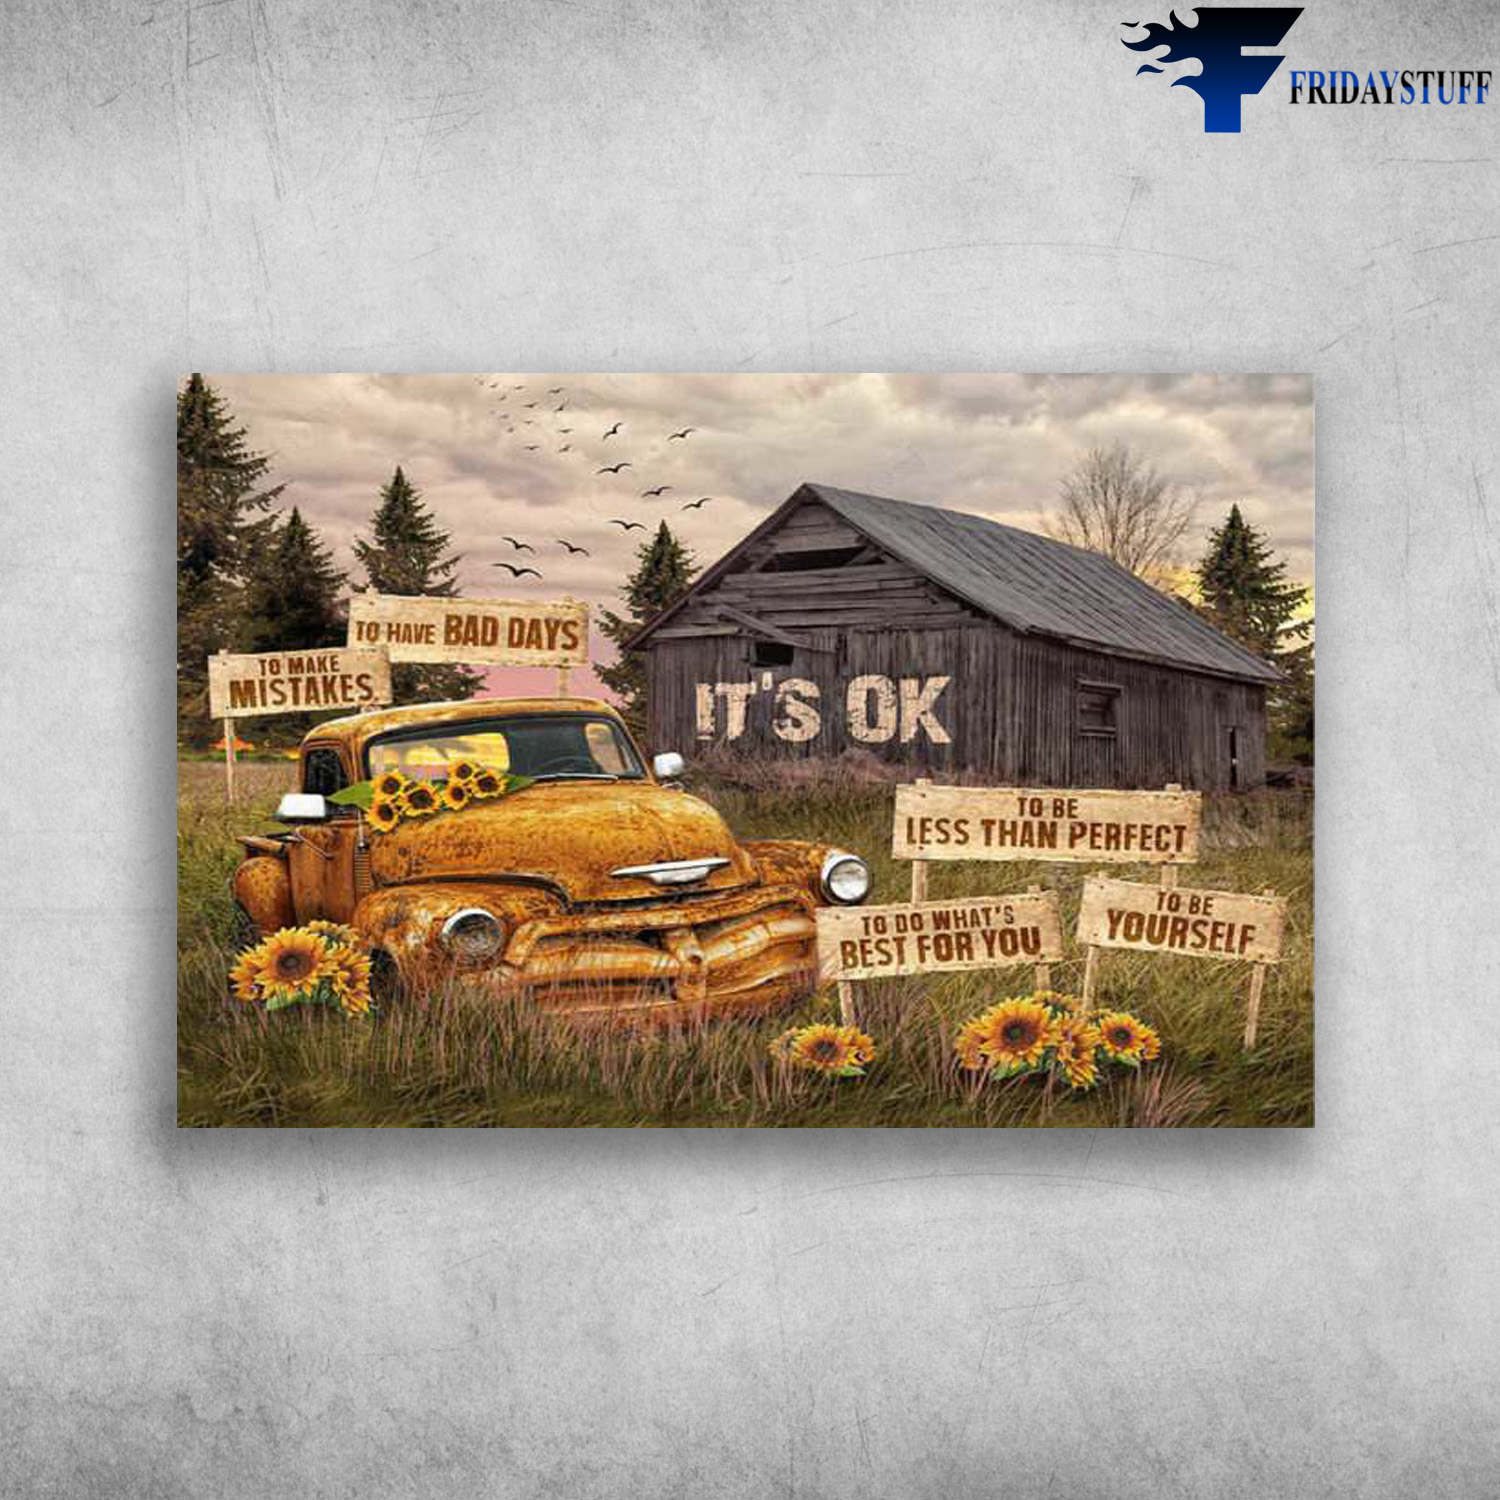 Farmhouse Scene, Sunflower Truck - It's Okay To Have Bad Days, To Make Mistakes, To Be Less Than Perfect, To Do What's Best For You, To Be Yourself